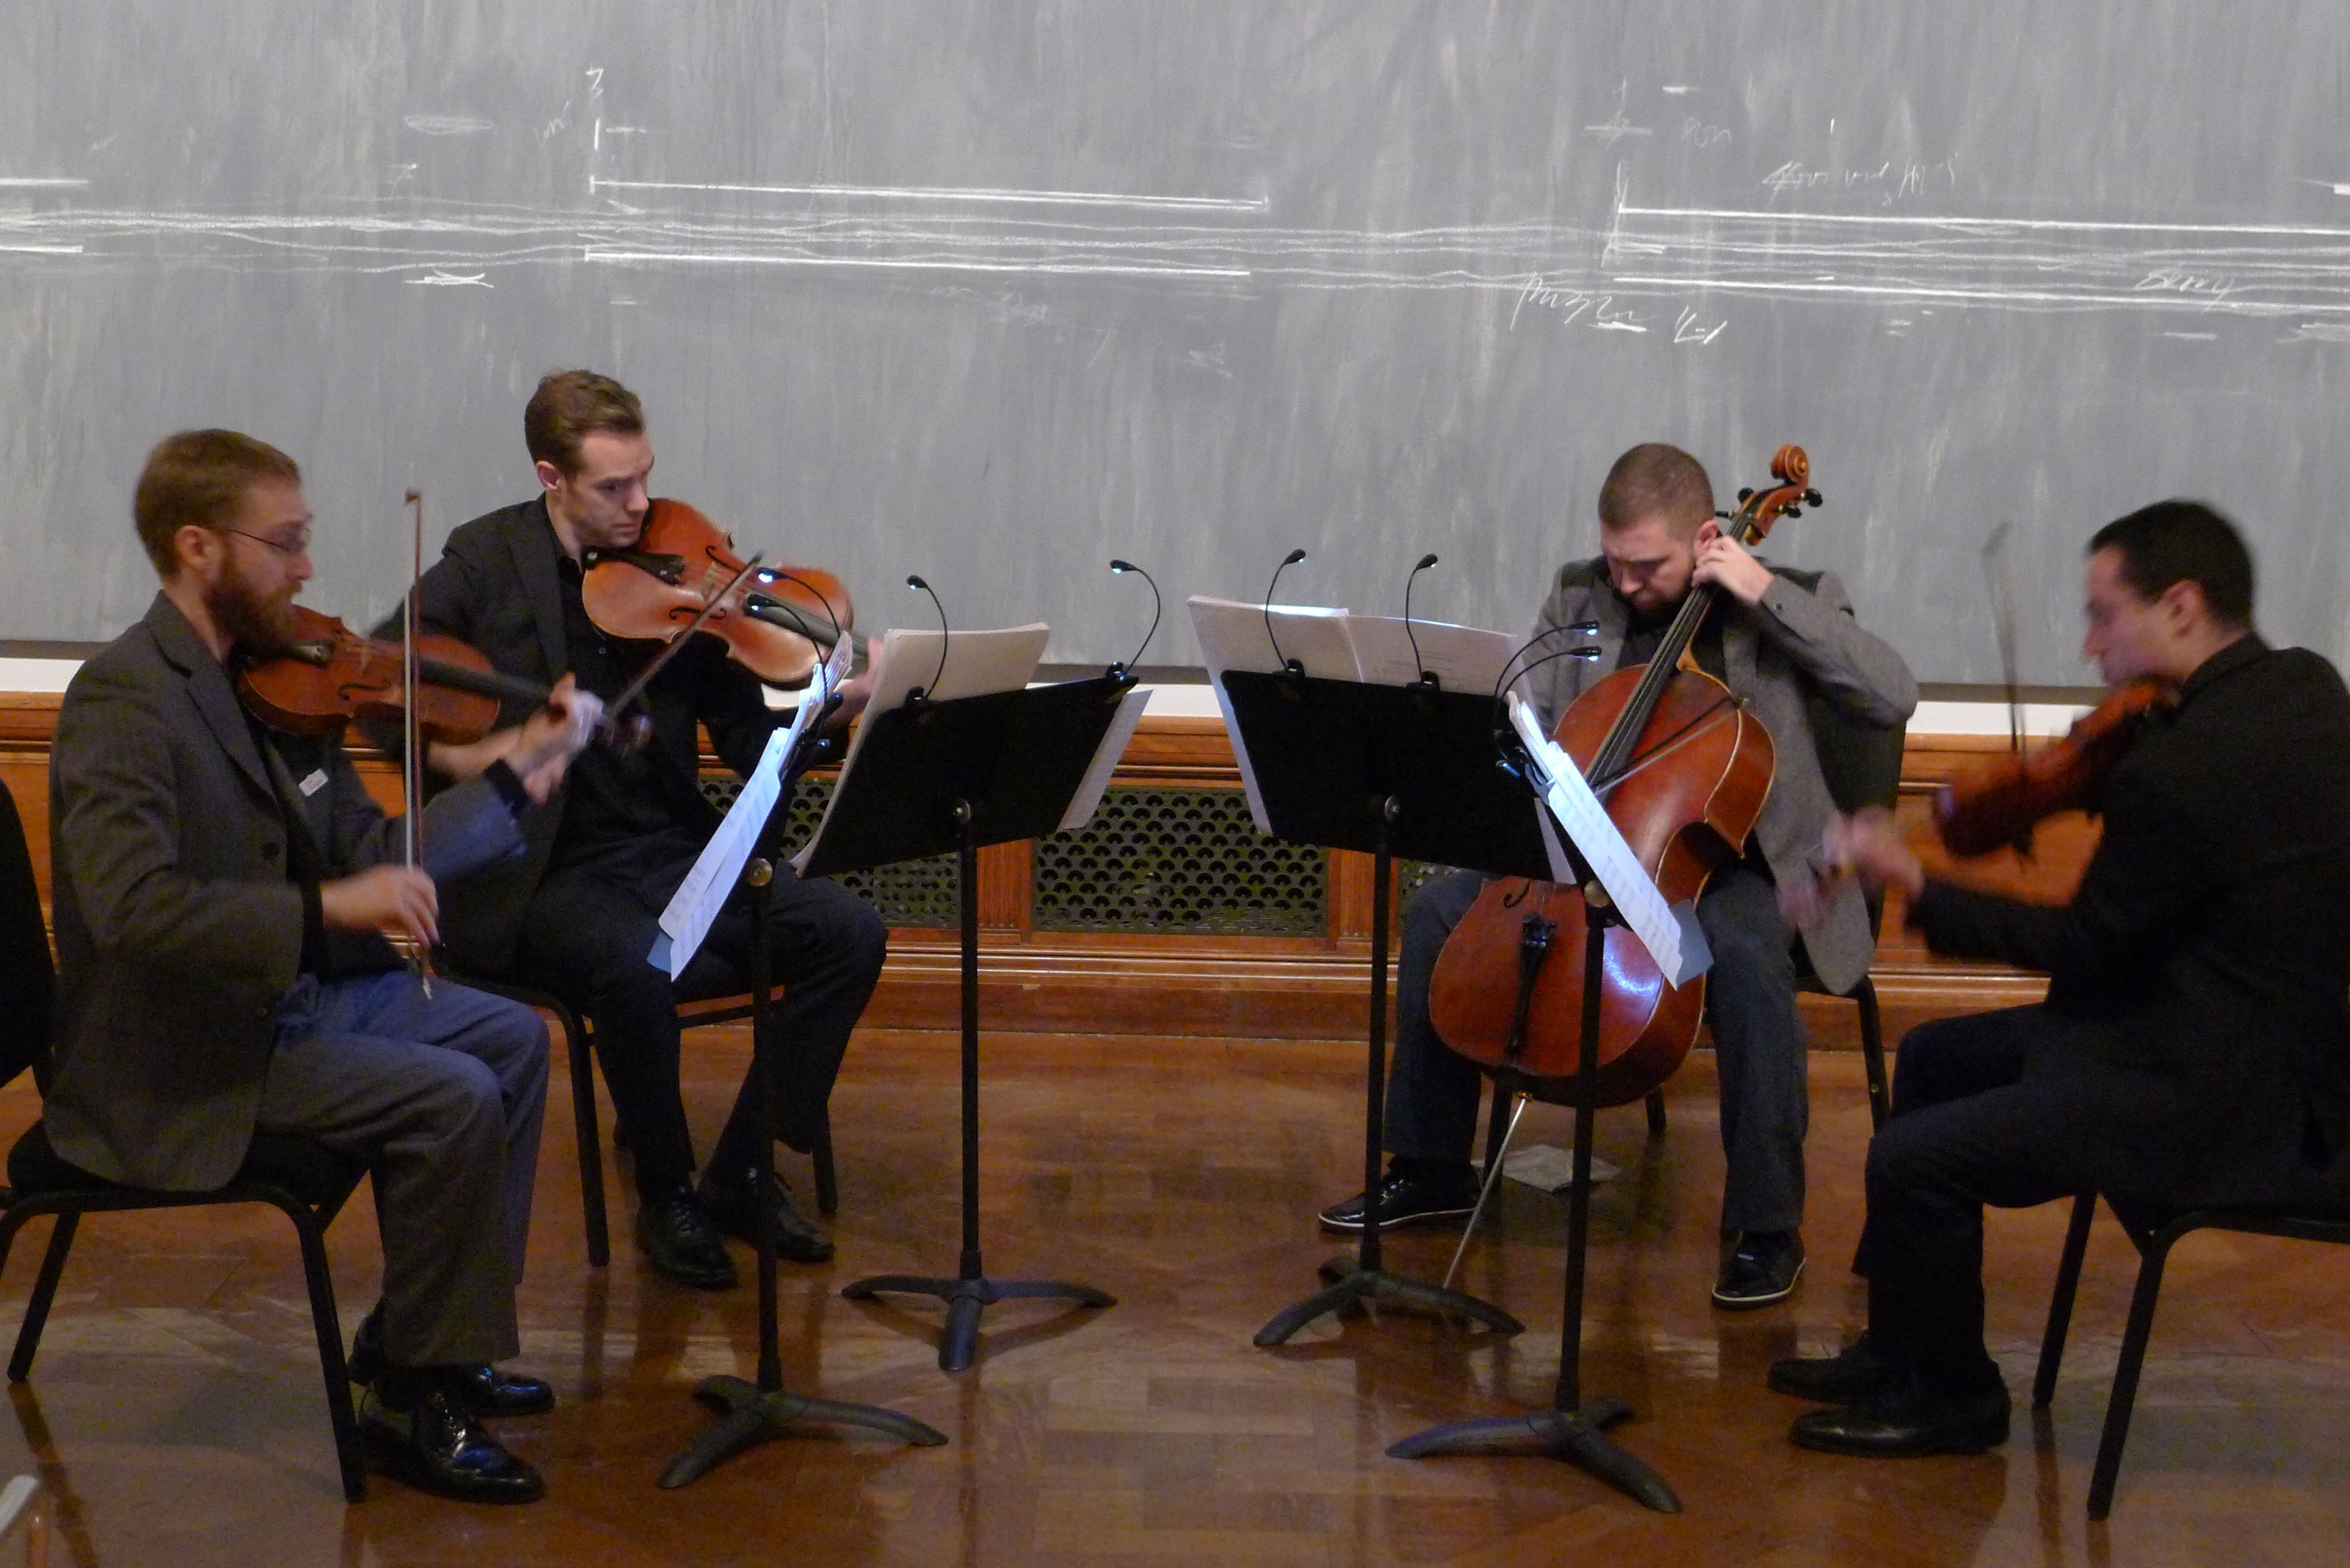 The JACK Quartet in front of Twombly's "Treatise on the Veil."